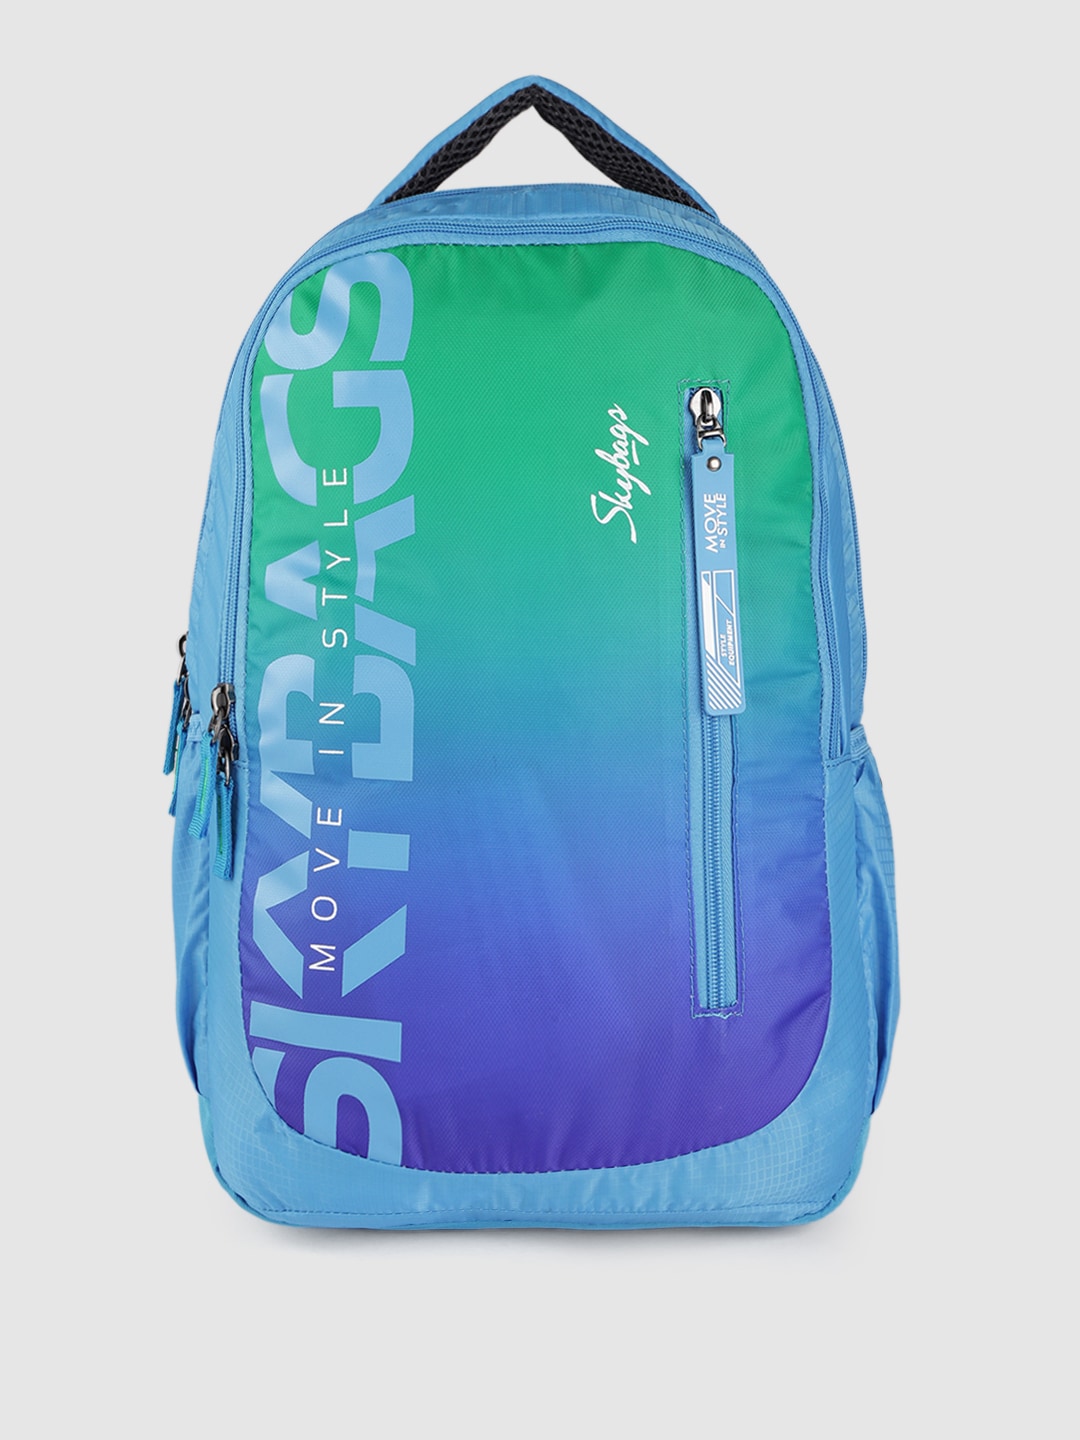 Skybags Unisex Blue & Green Brand Logo Printed Backpack Price in India